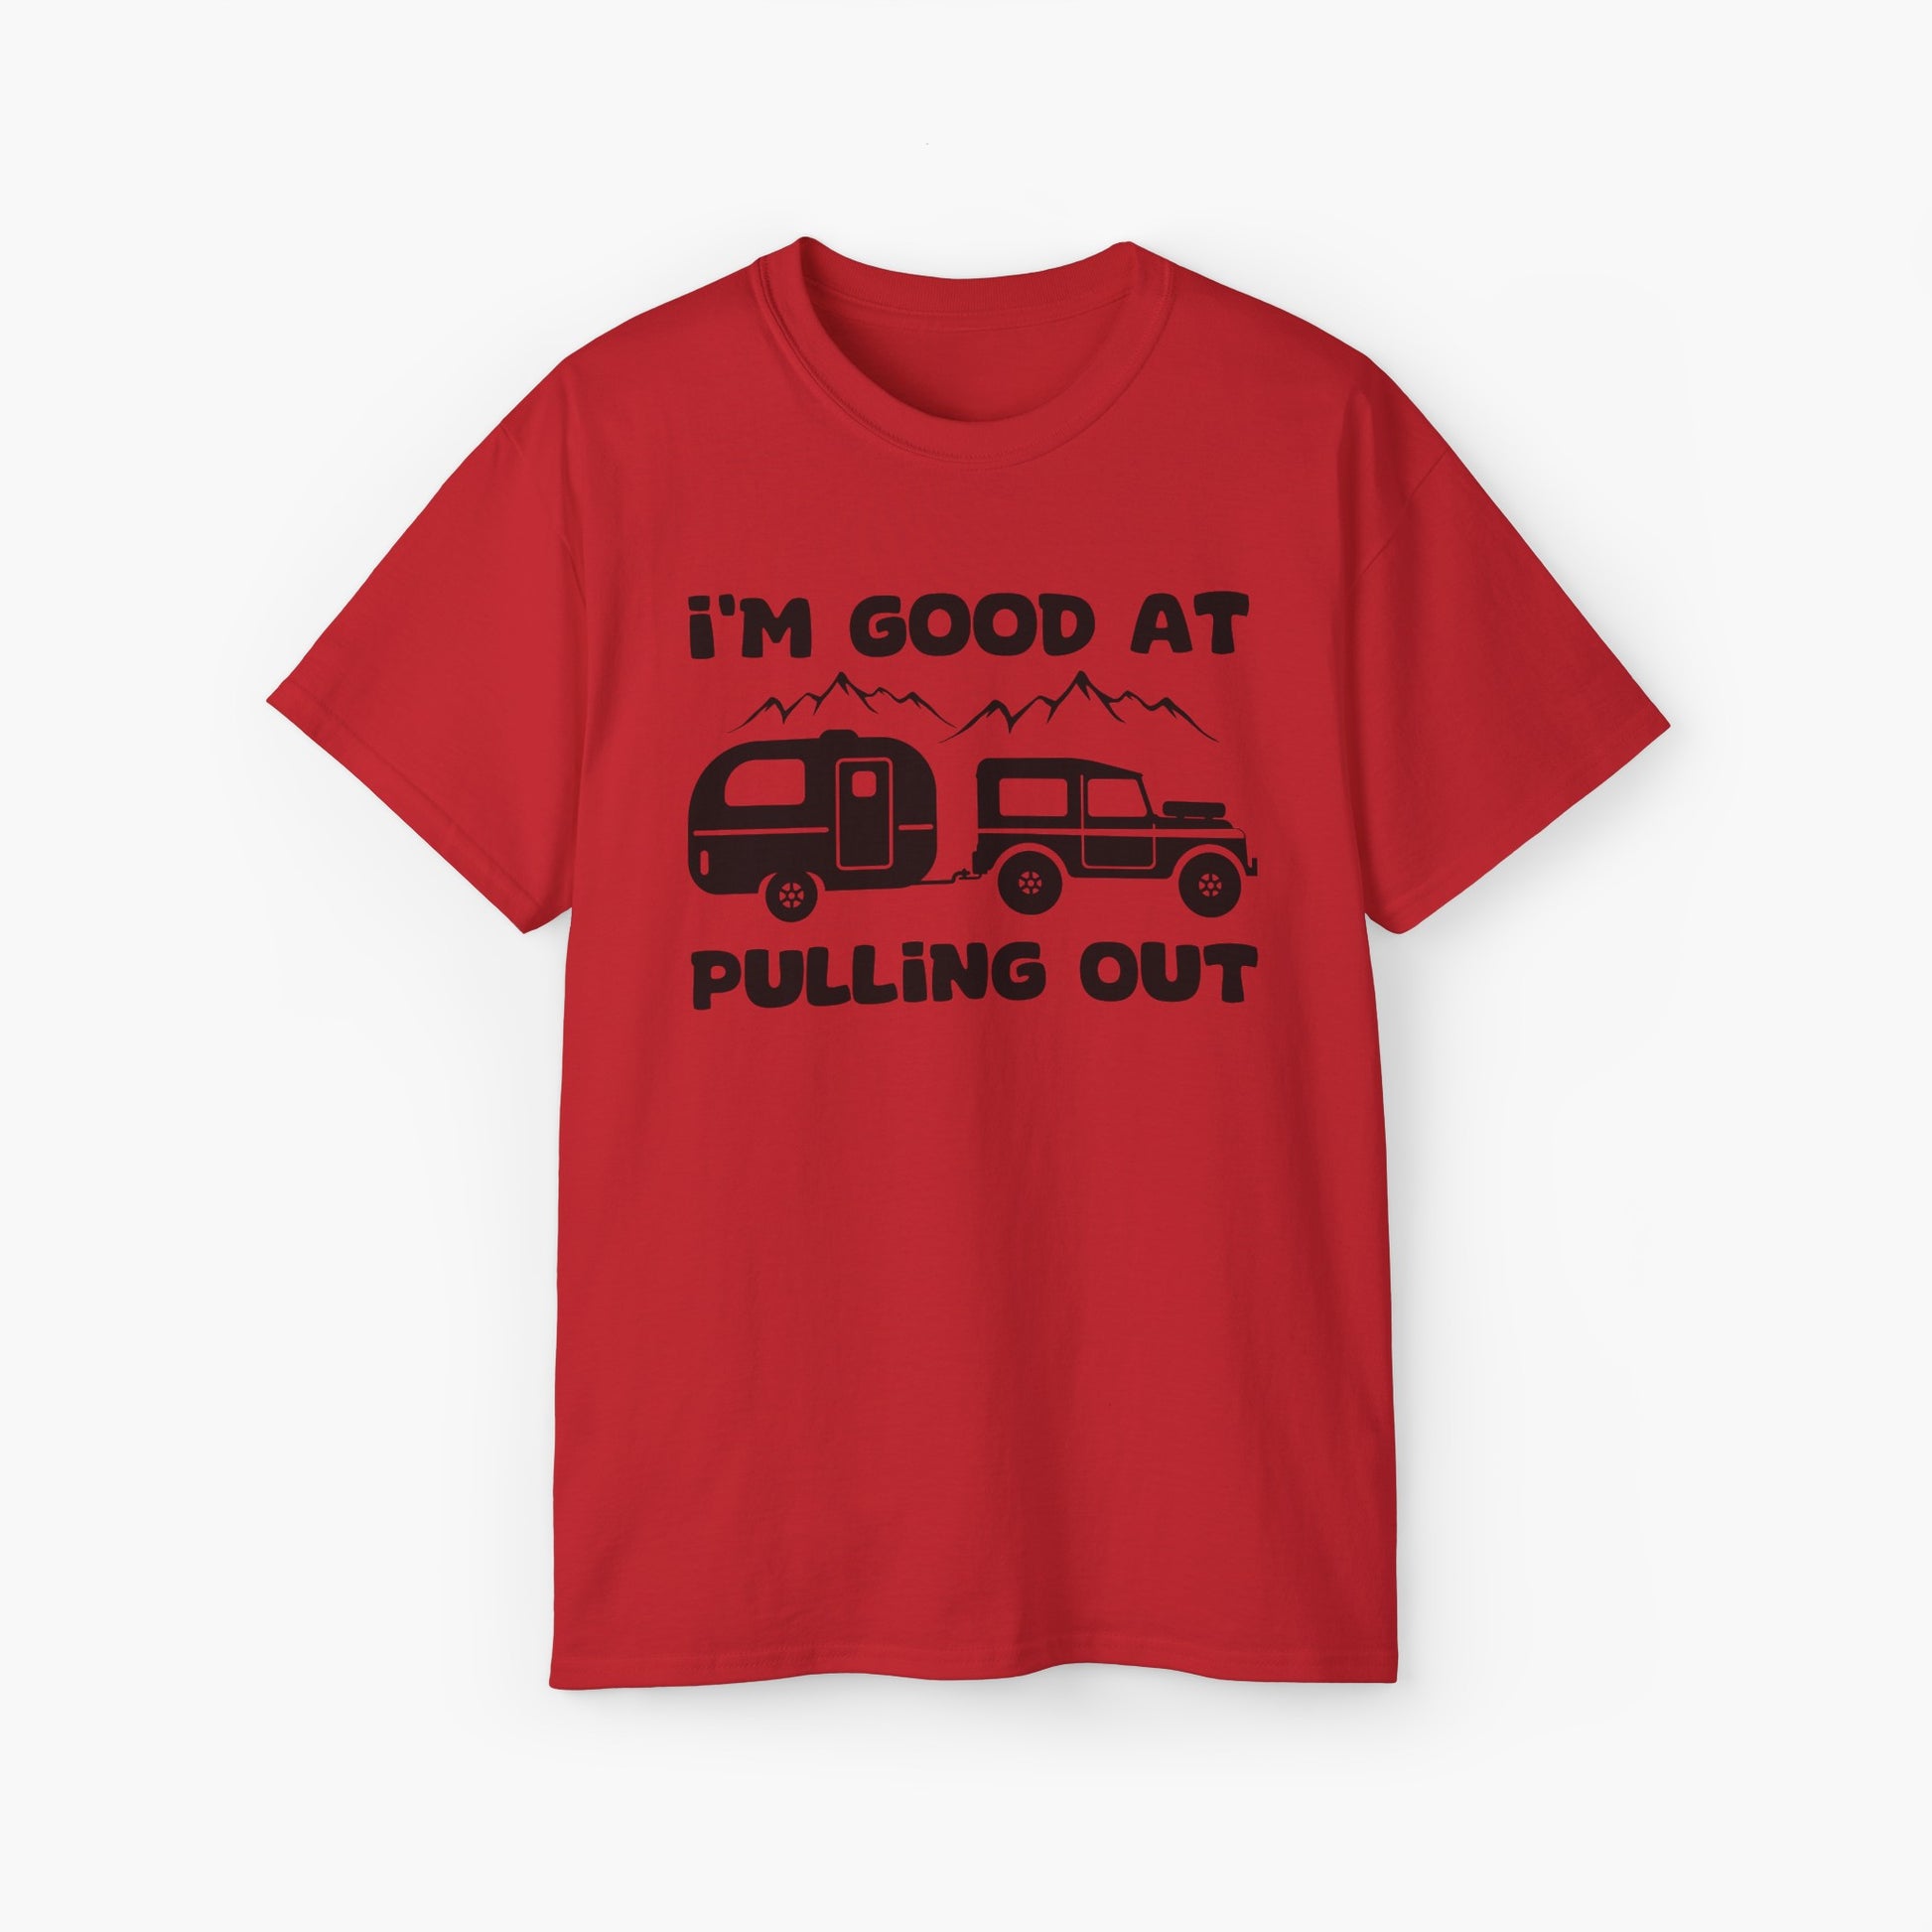 Red t-shirt with humorous text 'I'm good at pulling out' featuring an image of a truck pulling a camping van, set against mountains on a plain background.